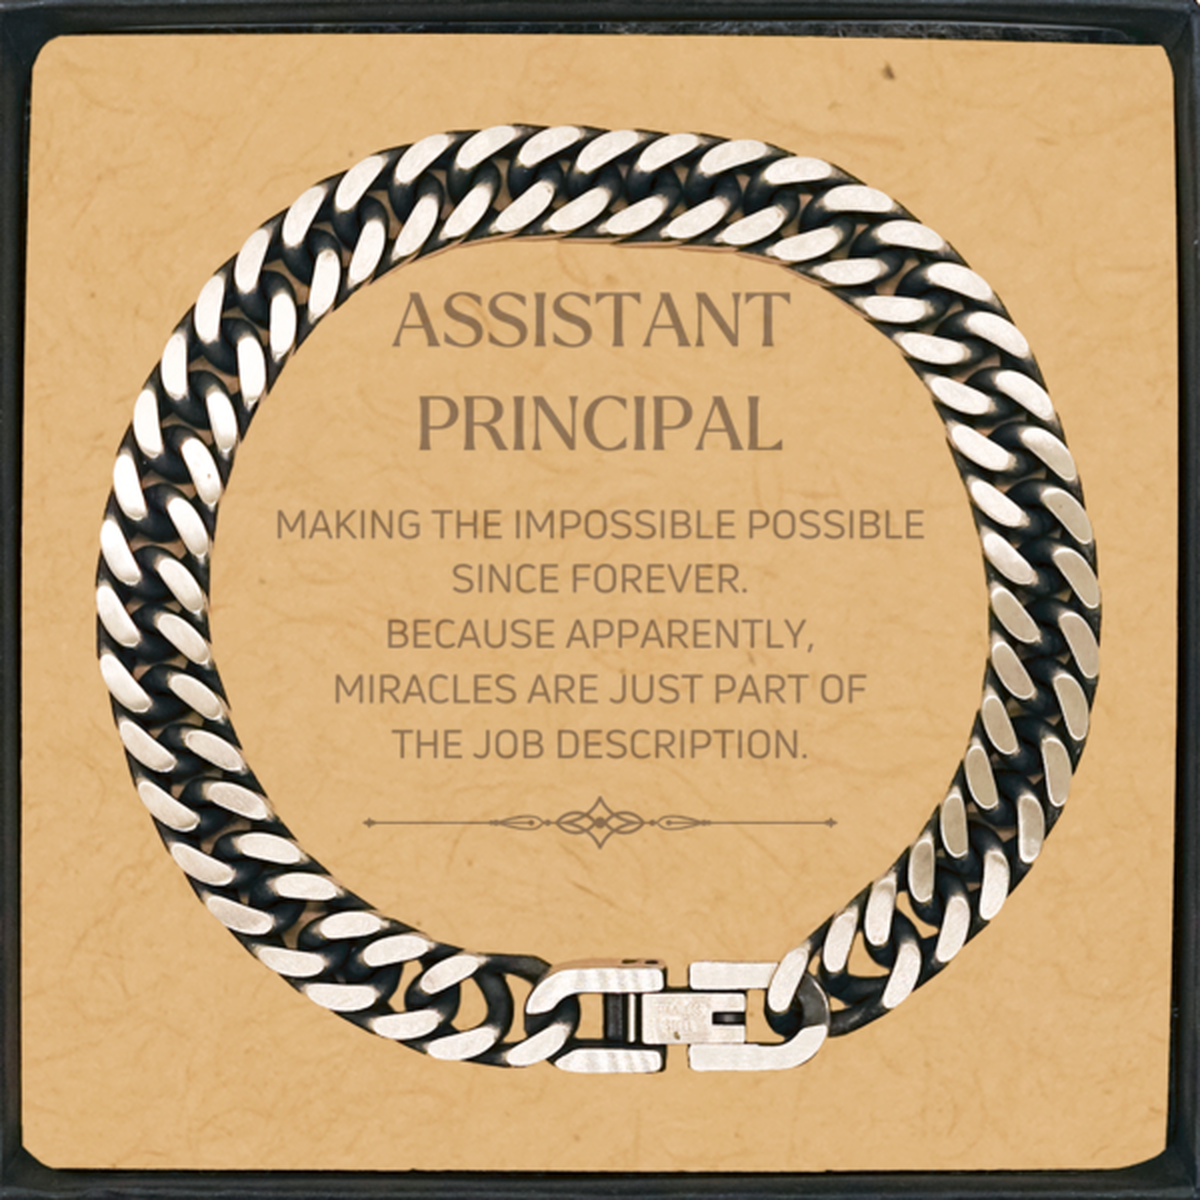 Funny Assistant Principal Gifts, Miracles are just part of the job description, Inspirational Birthday Cuban Link Chain Bracelet For Assistant Principal, Men, Women, Coworkers, Friends, Boss